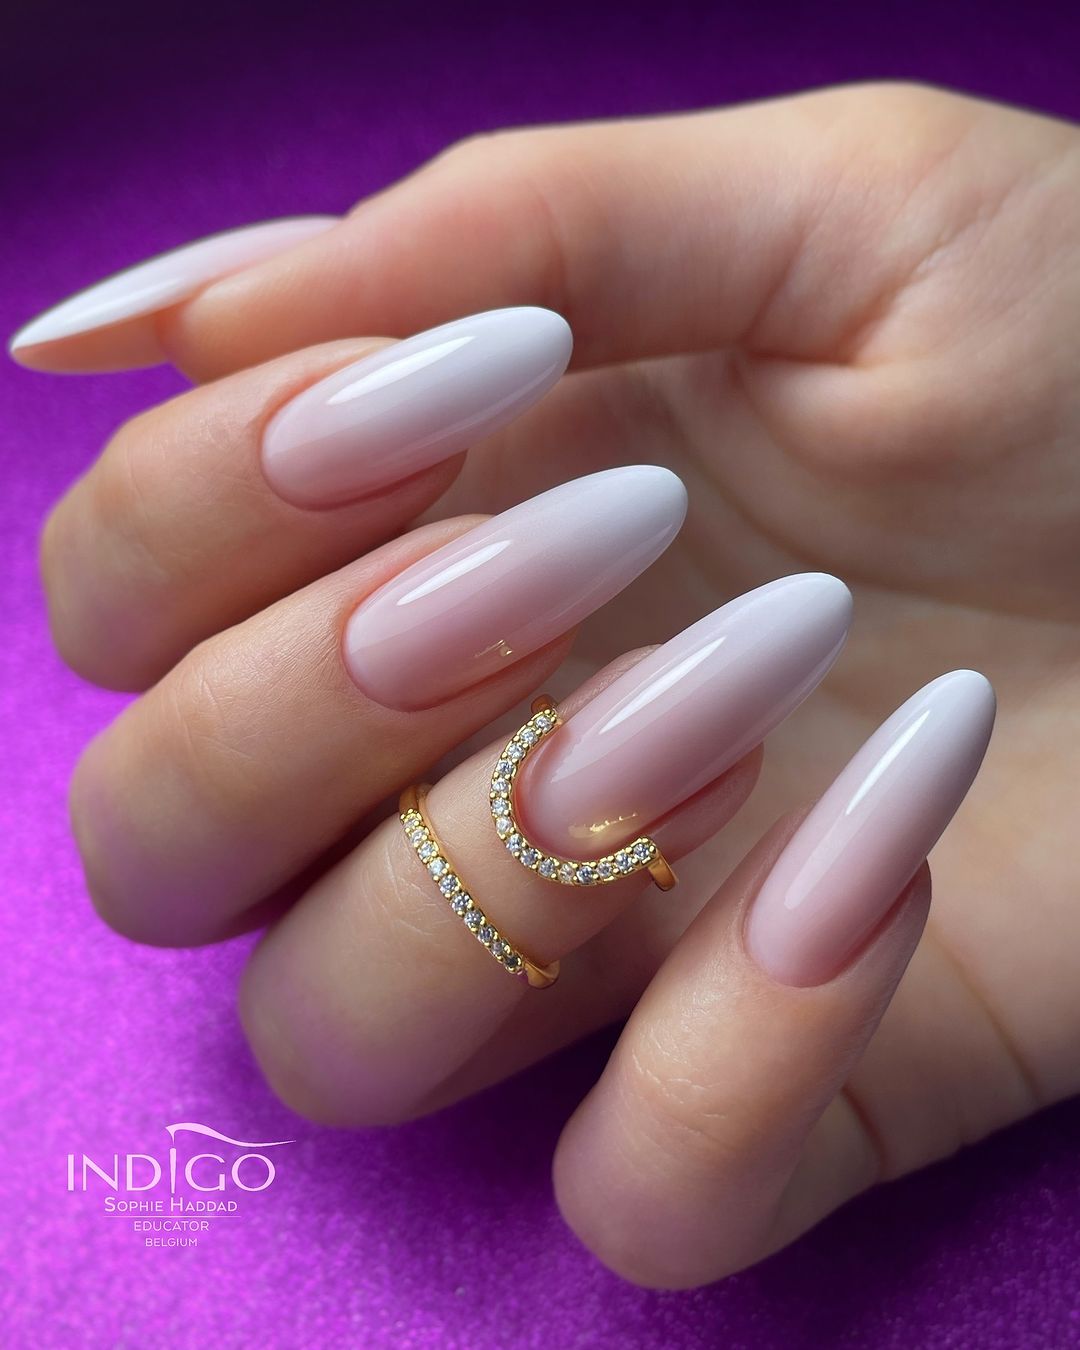 Effortlessly Stylish: Simple Summer Nail Designs You'll Love